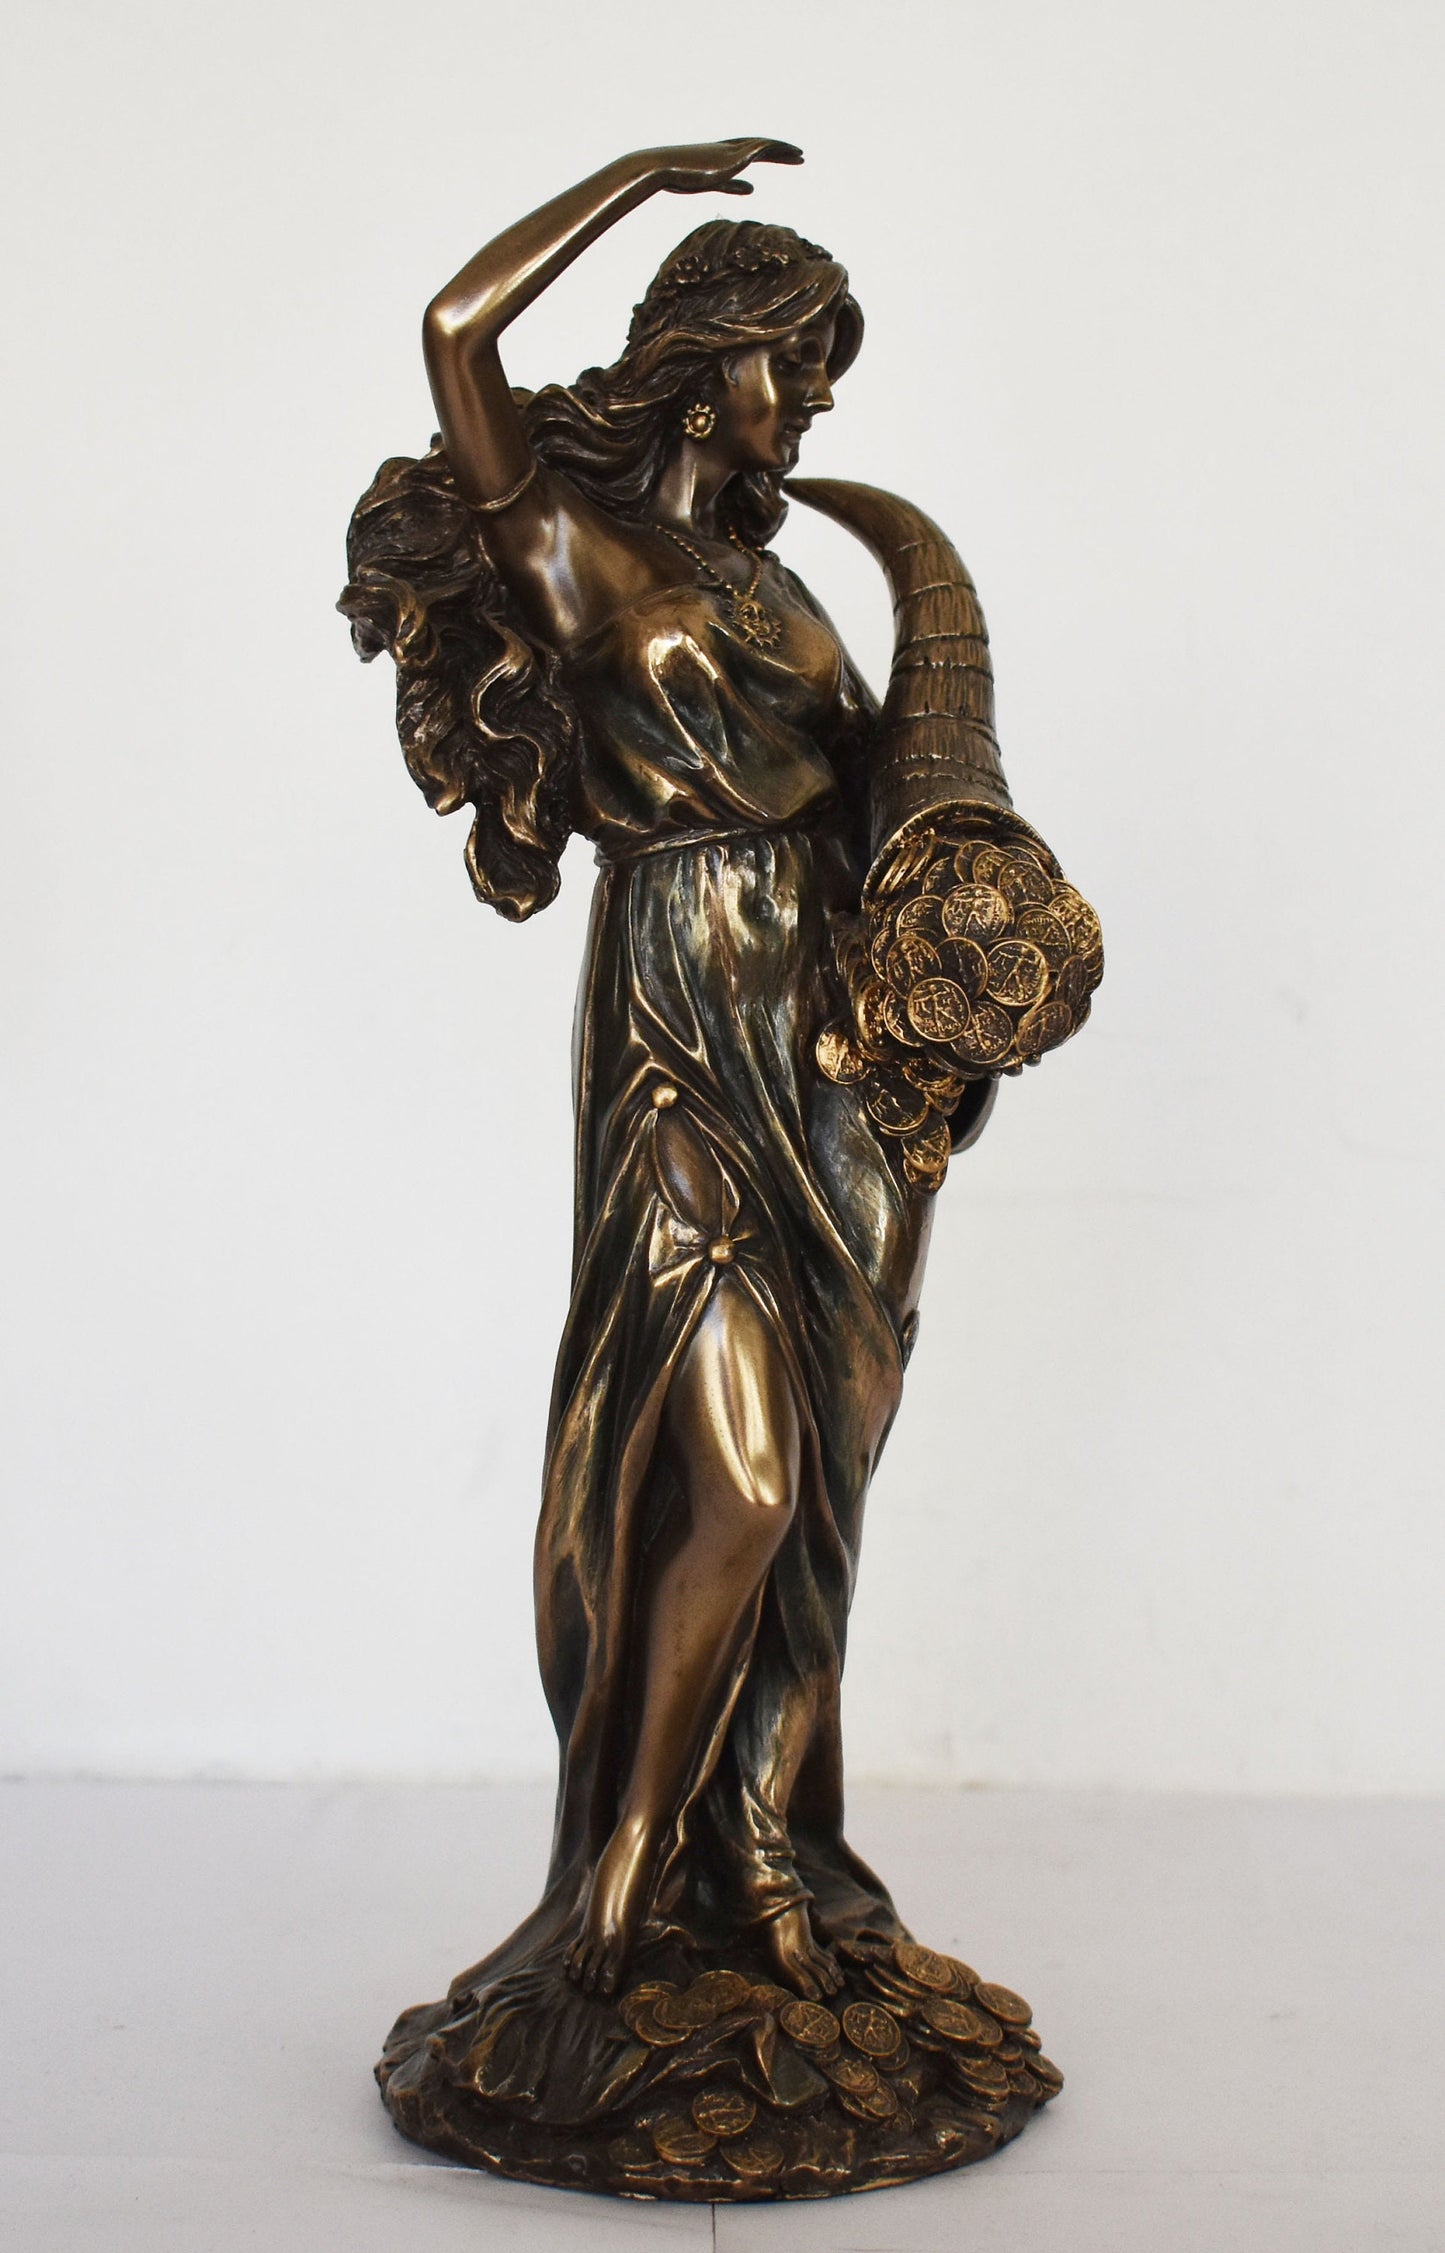 Tyche Fortuna - Greek Roman Goddess of Fortune, Good Luck, Chance, Providence, Succes, Prosperity and Fate - Cold Cast Bronze Resin